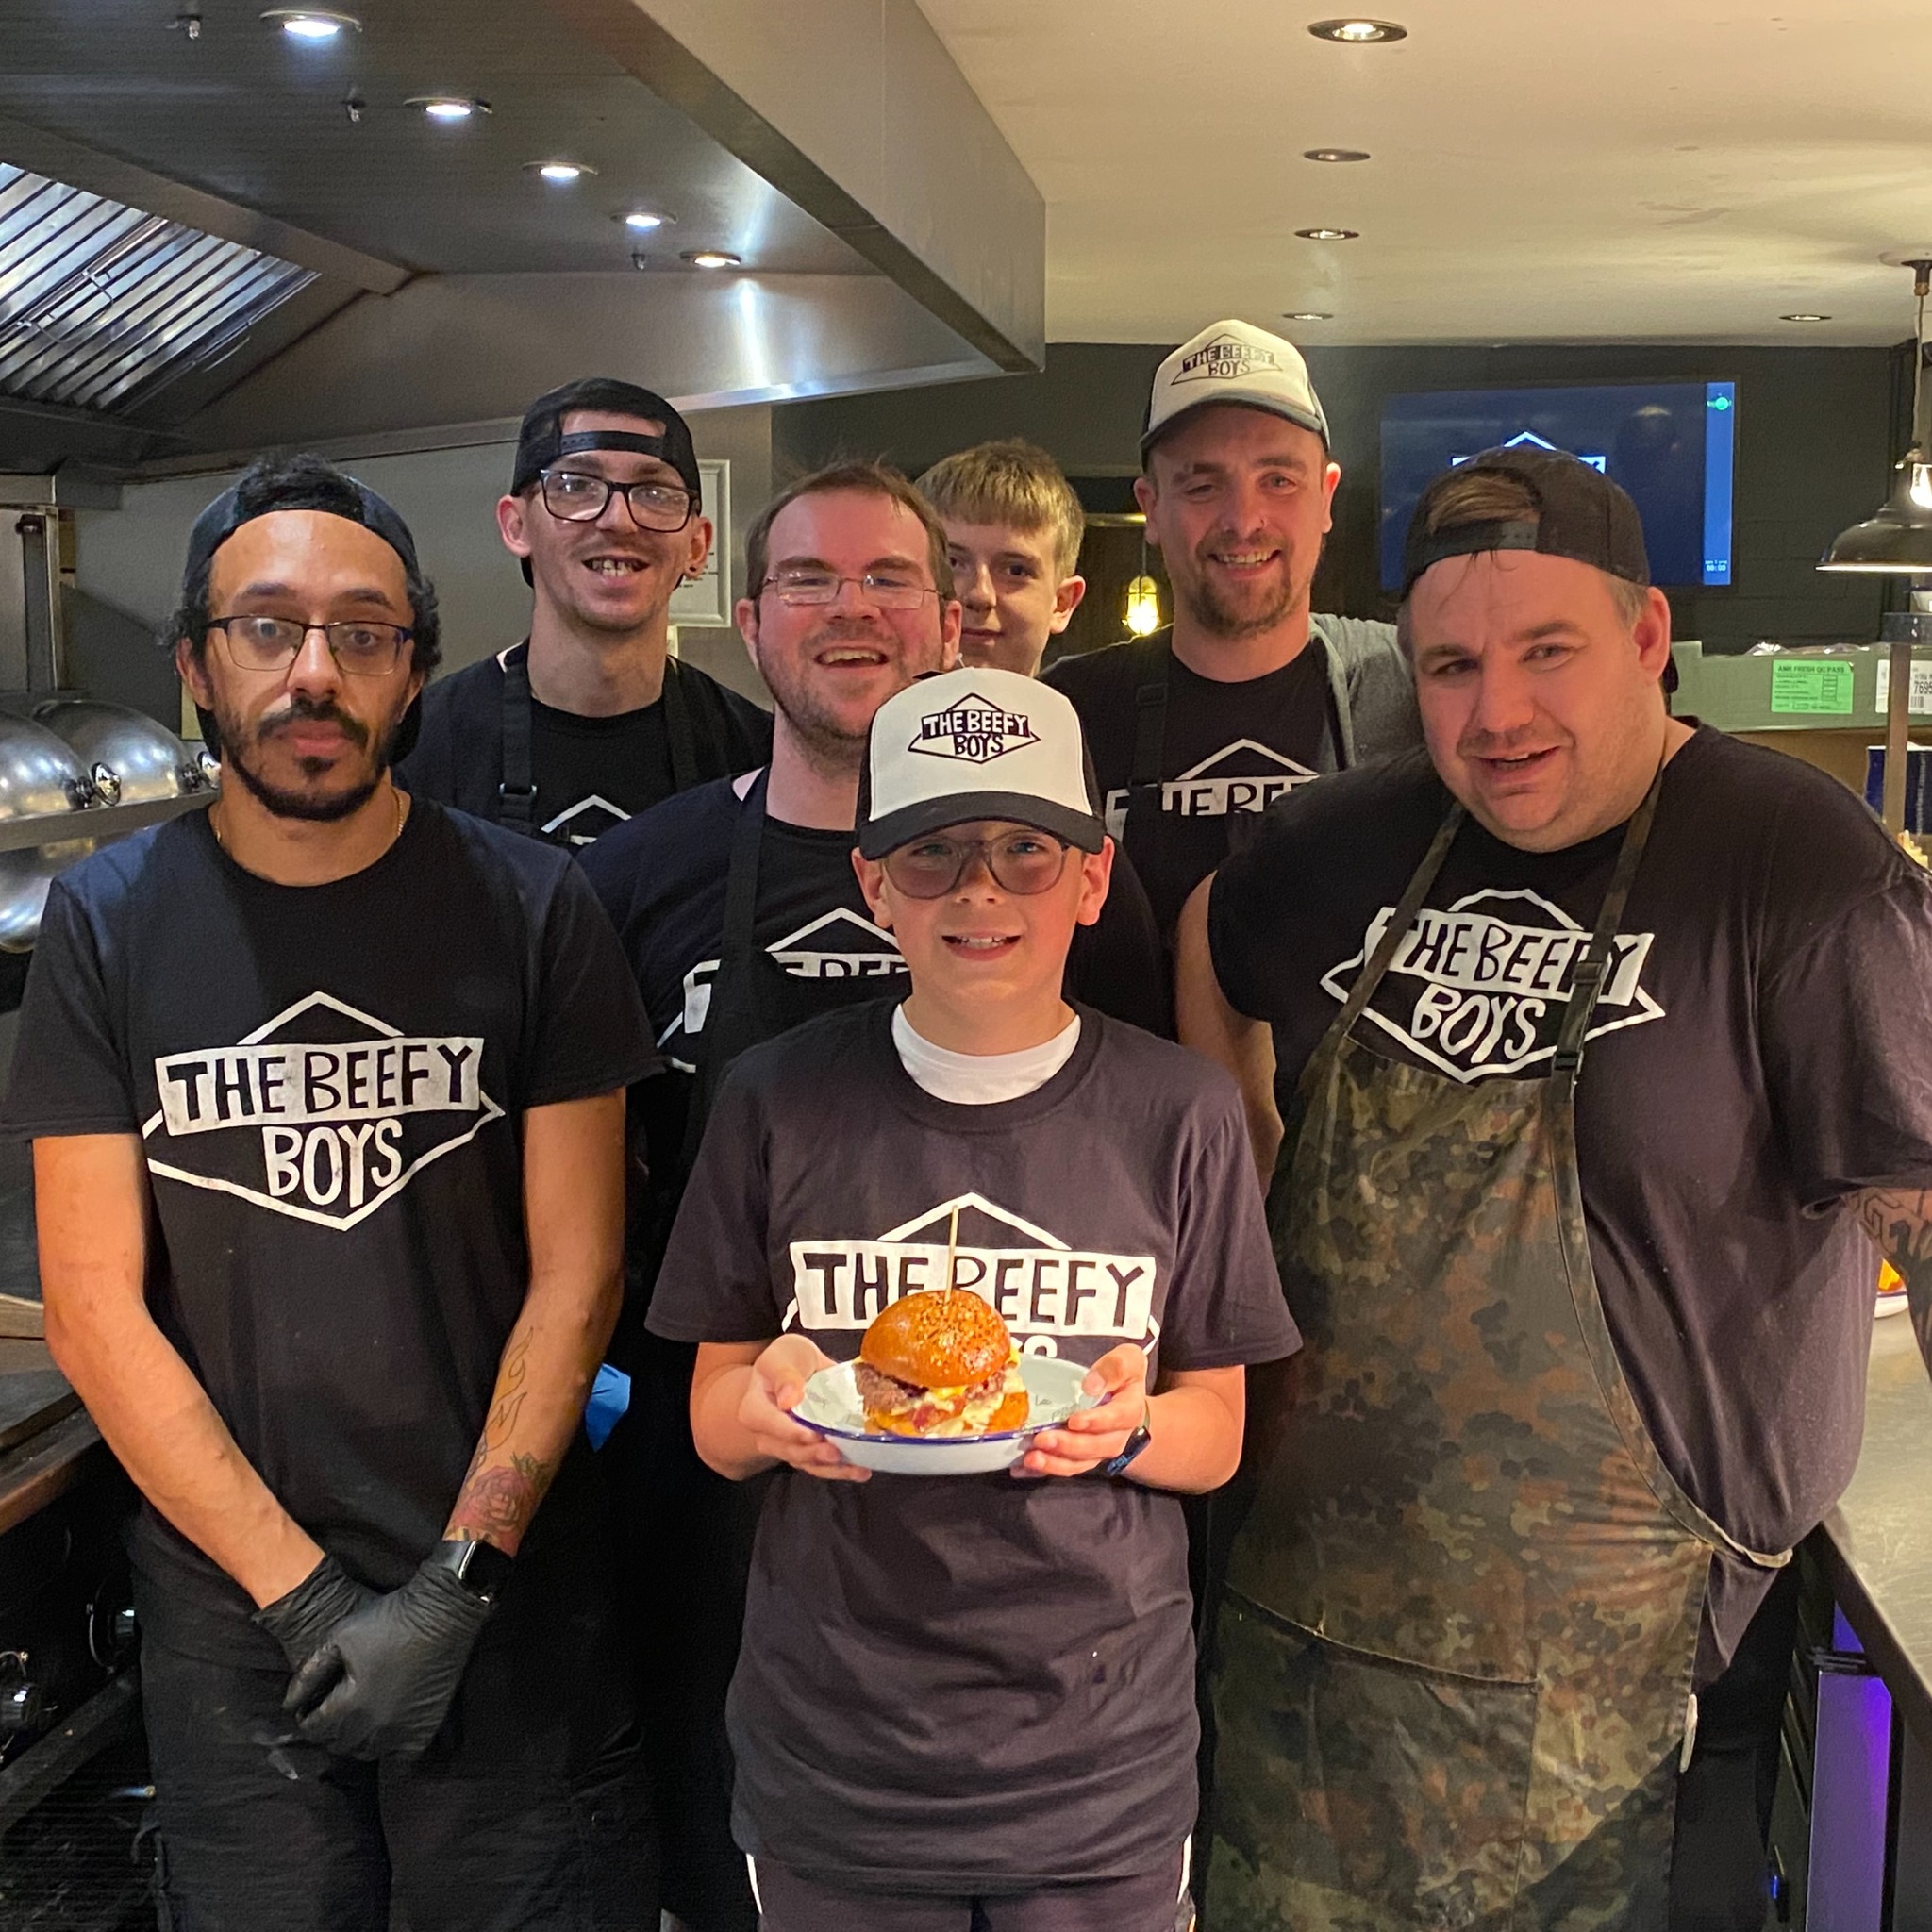 NEWS | The Beefy Boys invite young customer in to build his own burger